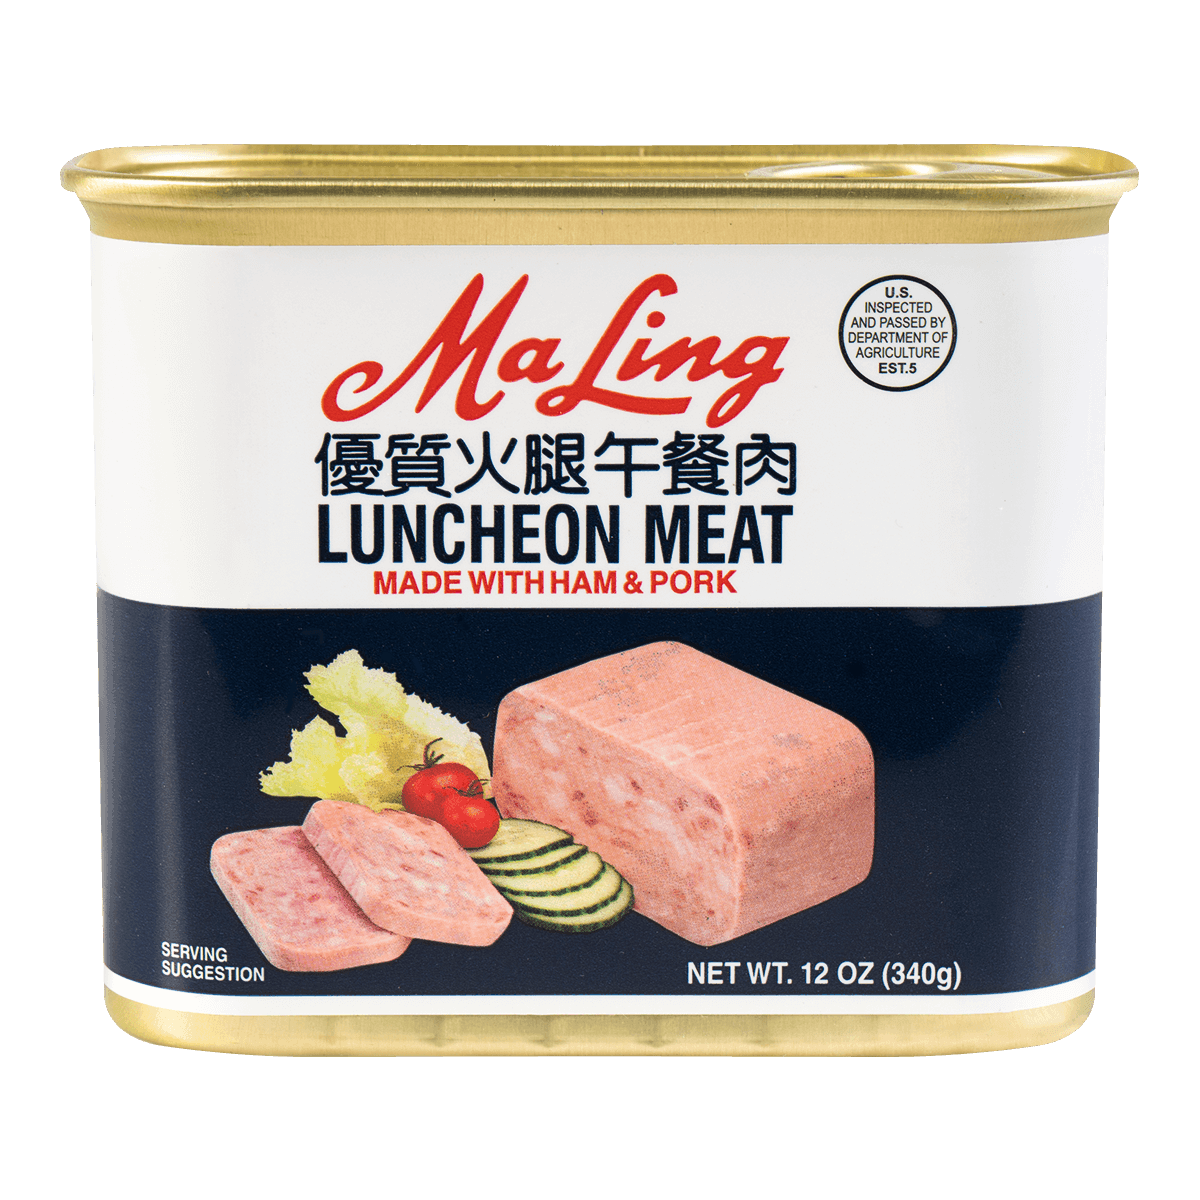 ЛАНЧЕОН меат. Luncheon meat консервы. Pork Luncheon meat. Luncheon meat китайский. Made for meat